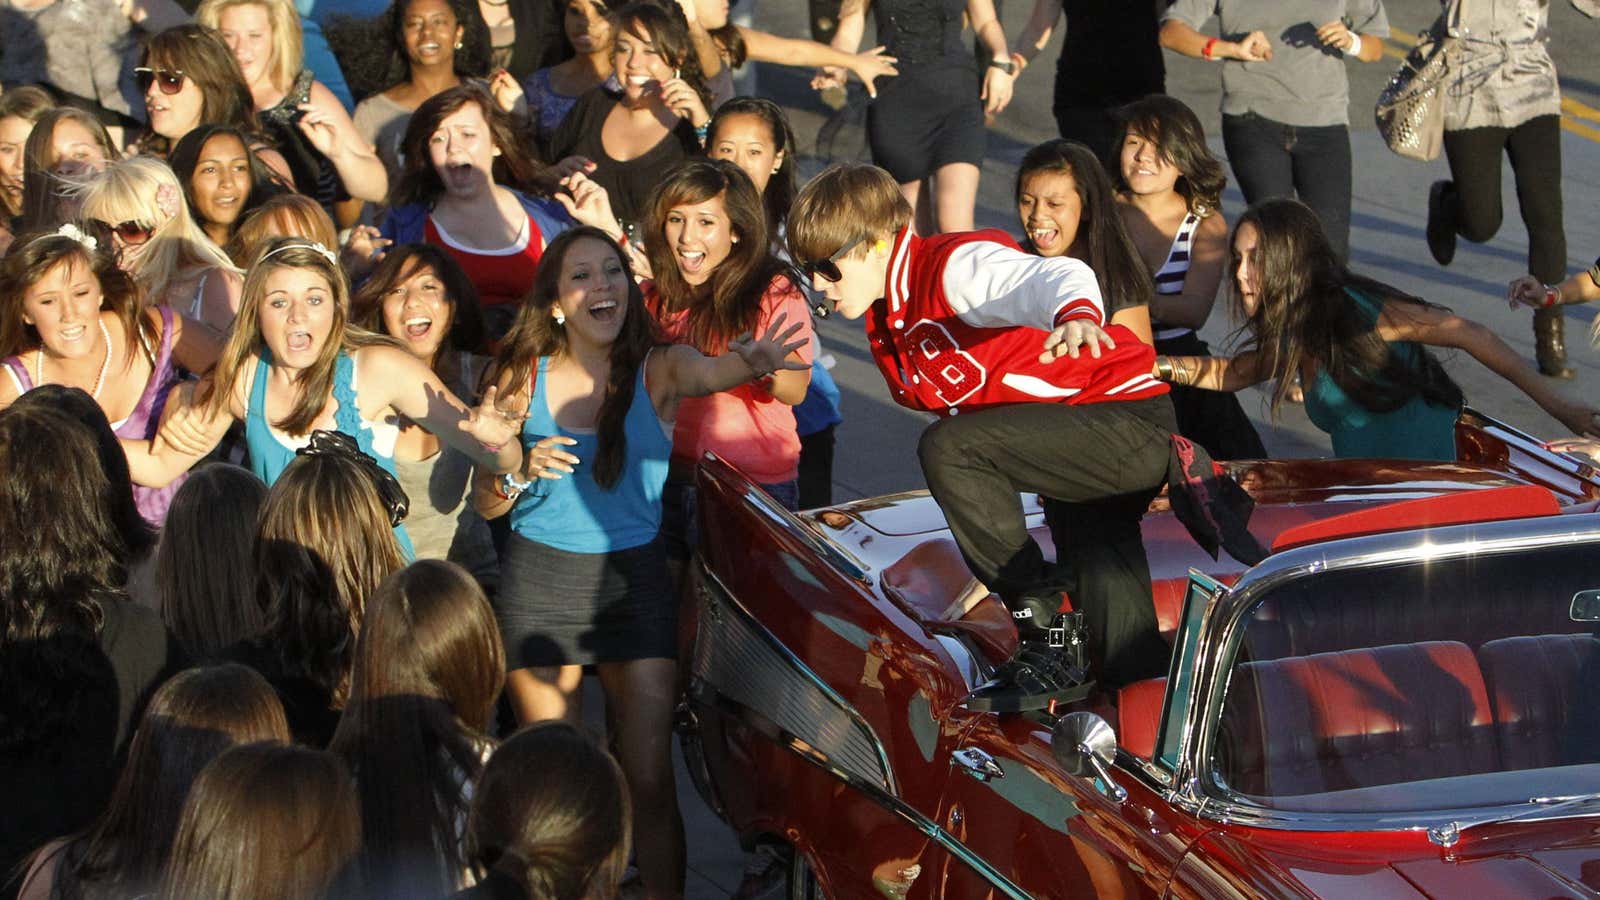 Justin Bieber jumps out of a car during a 2010 performance.